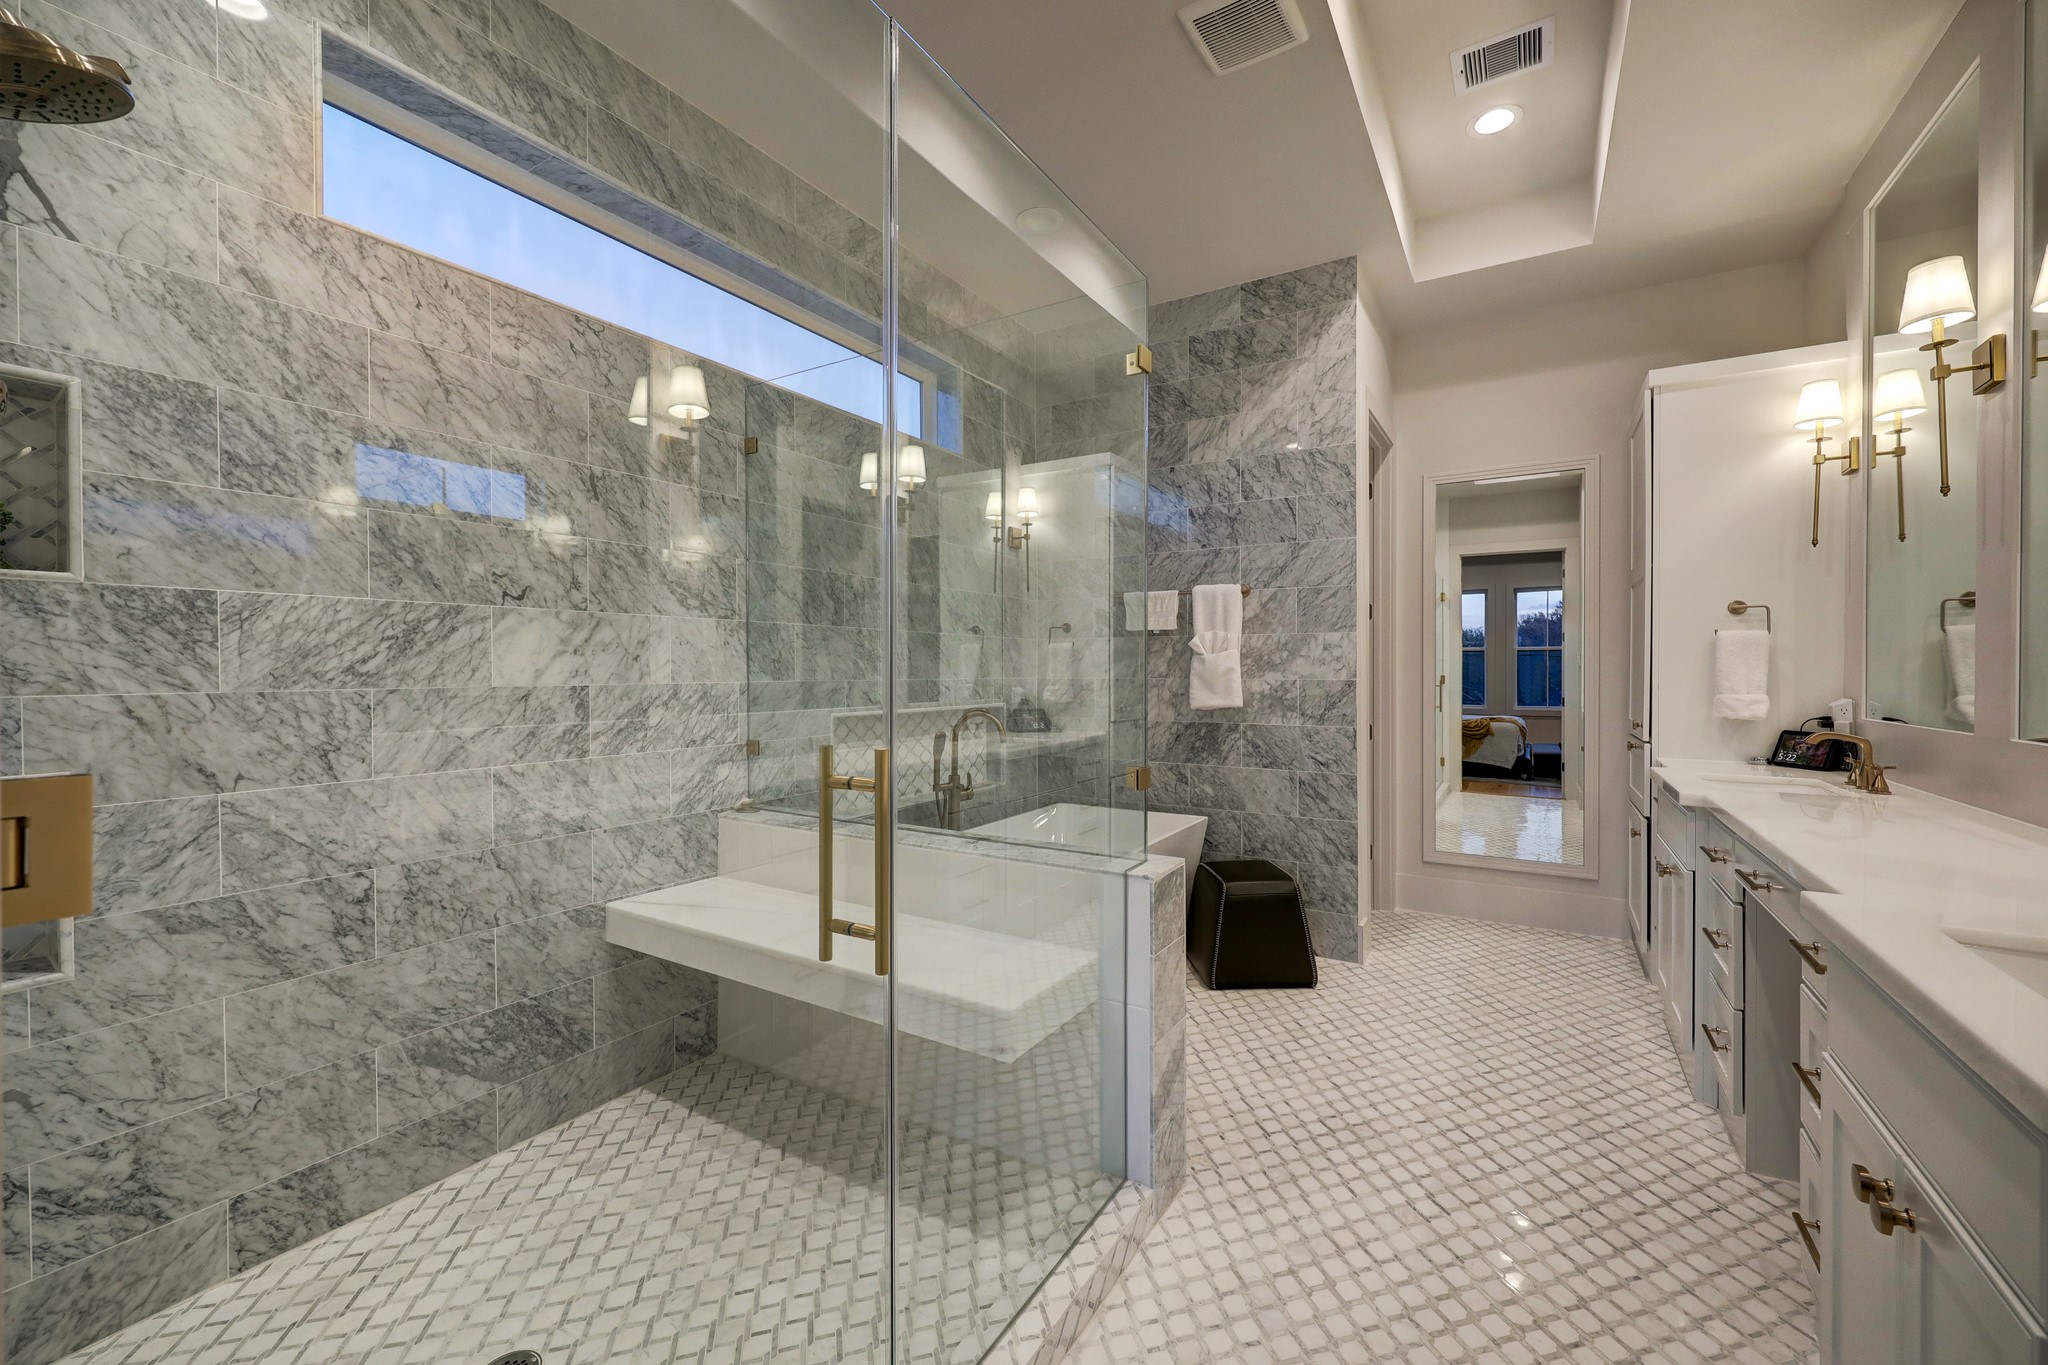 The windowed owner's bathroom dazzles with designer tile, floor-to-ceiling marble and a wide double vanity with great storage and a knee space.